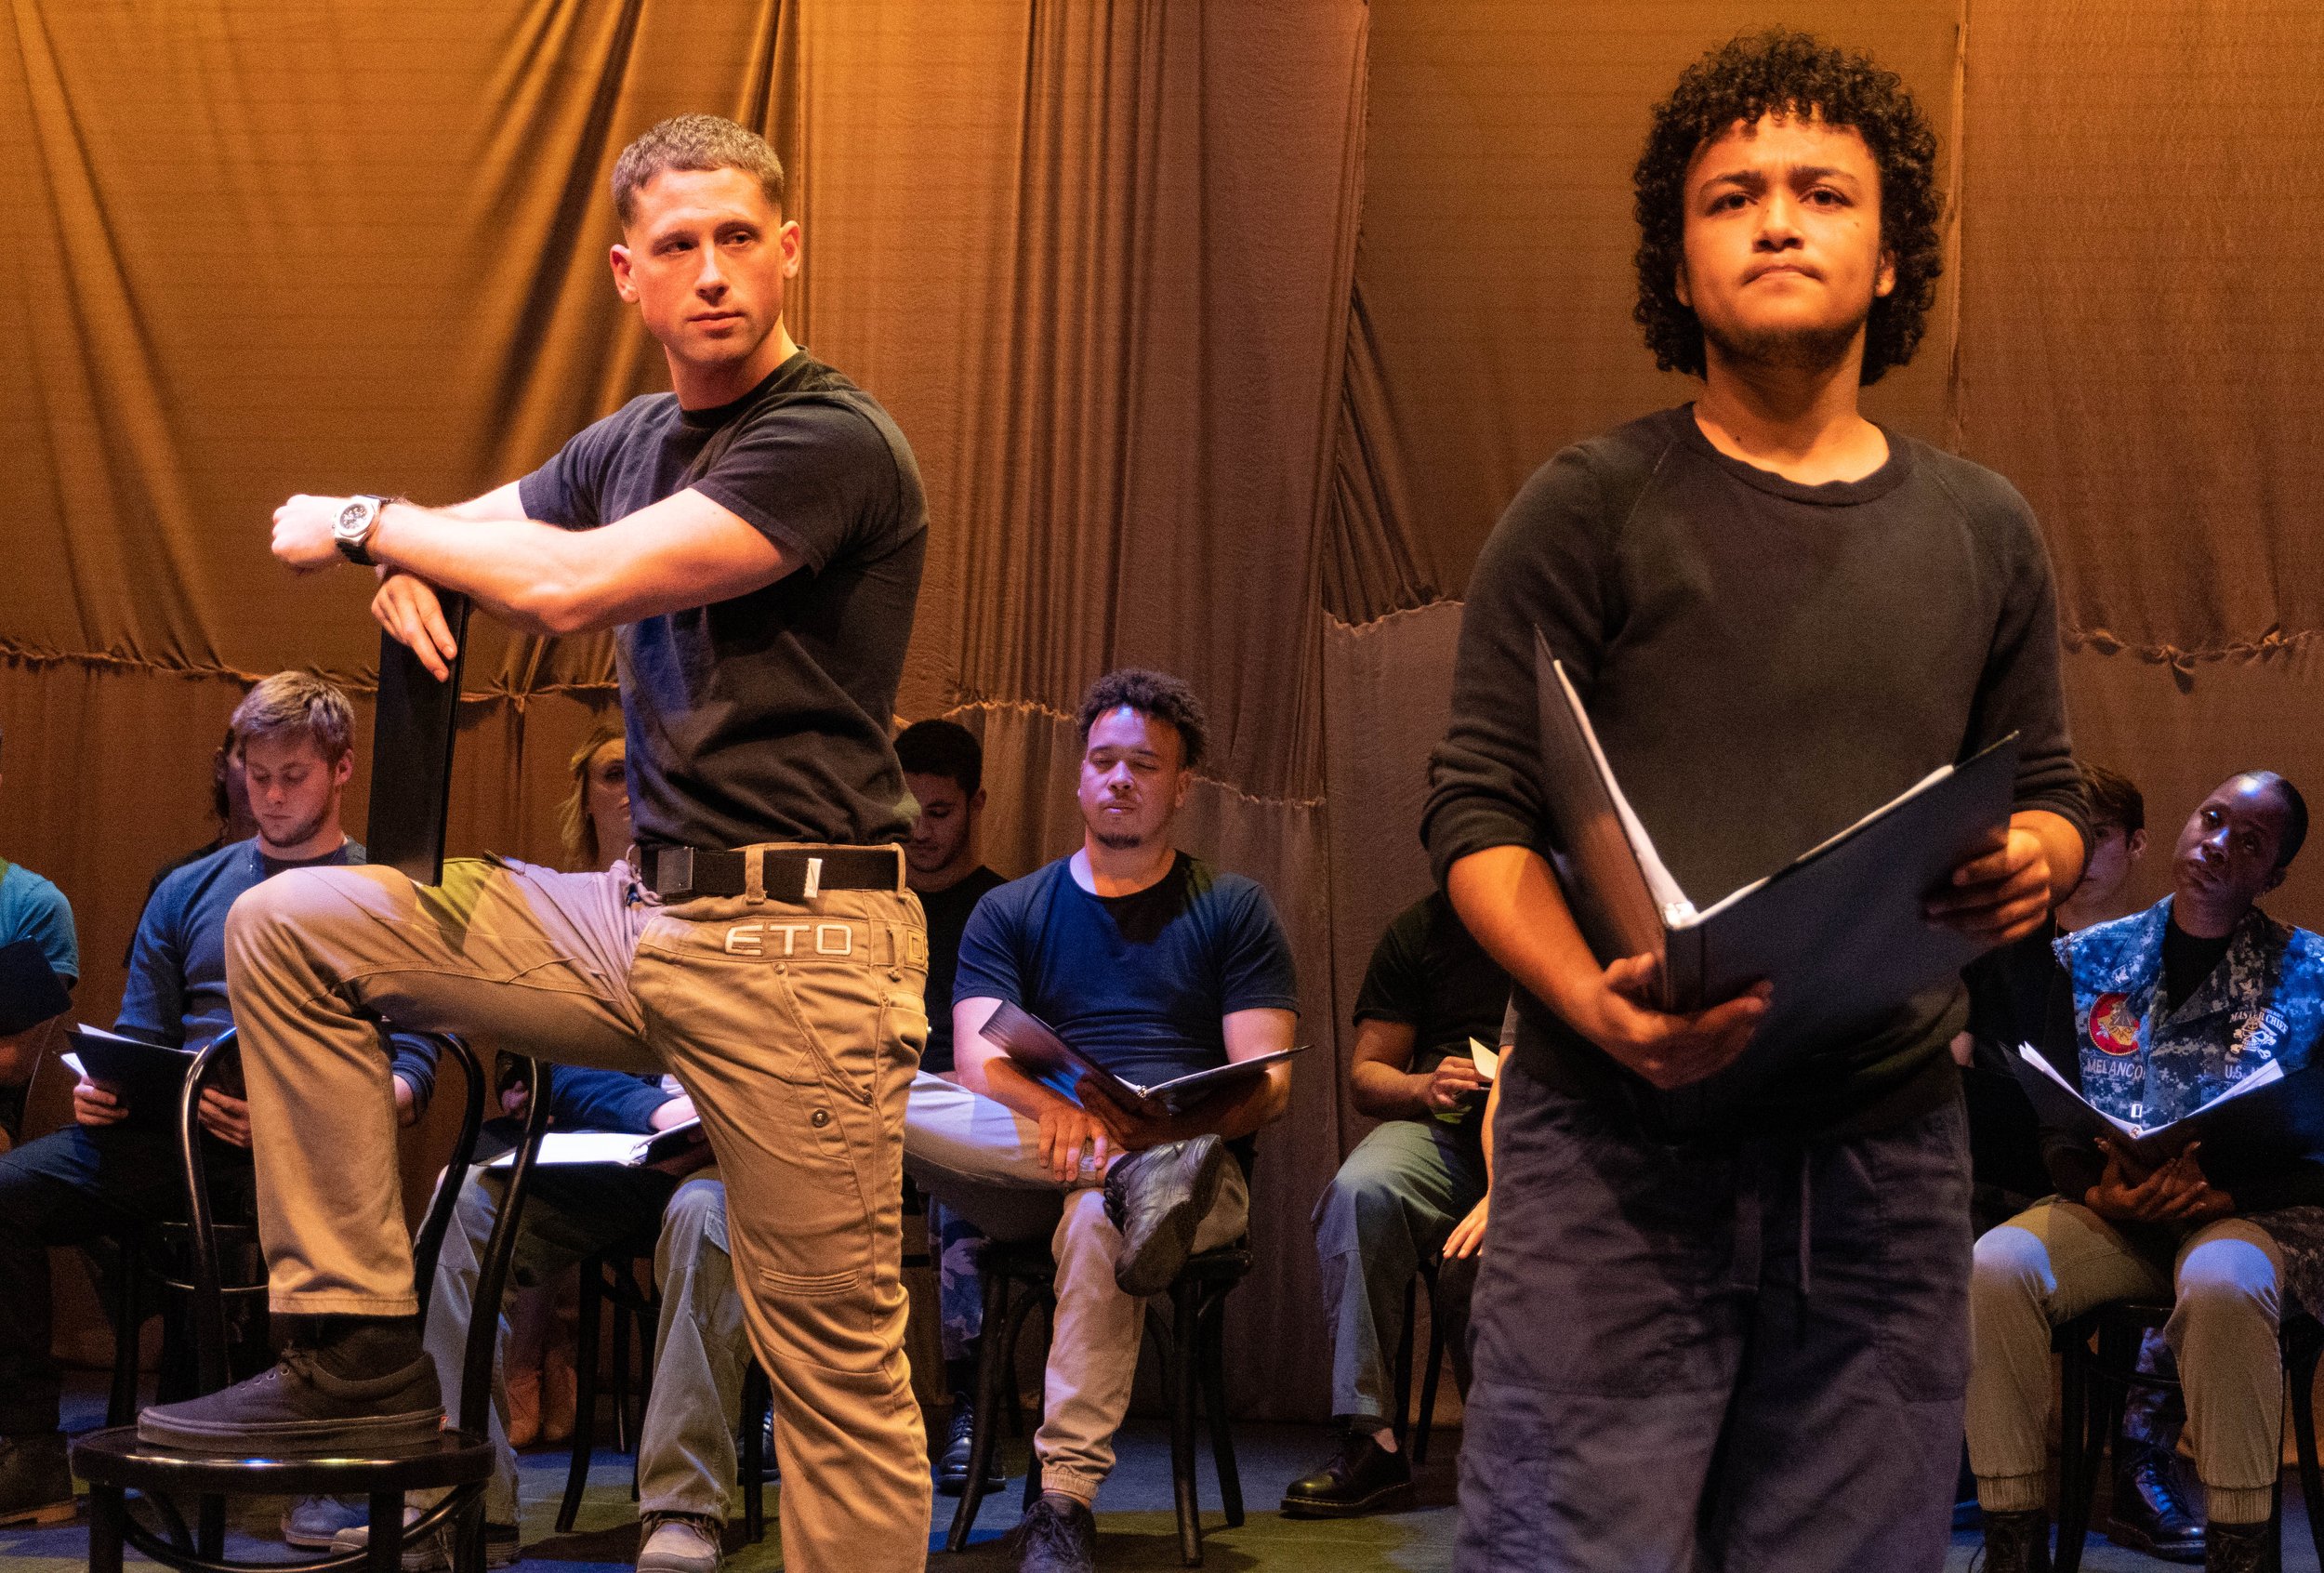  (L-R) Sam Frank plays Max a soldier in War Words and acts alongside Leo Hall who plays Janis an Afghanistan translator. War Words is a play written by Michelle Kholos Brooks and is part of a national initiative to honor veterans through theatrical s